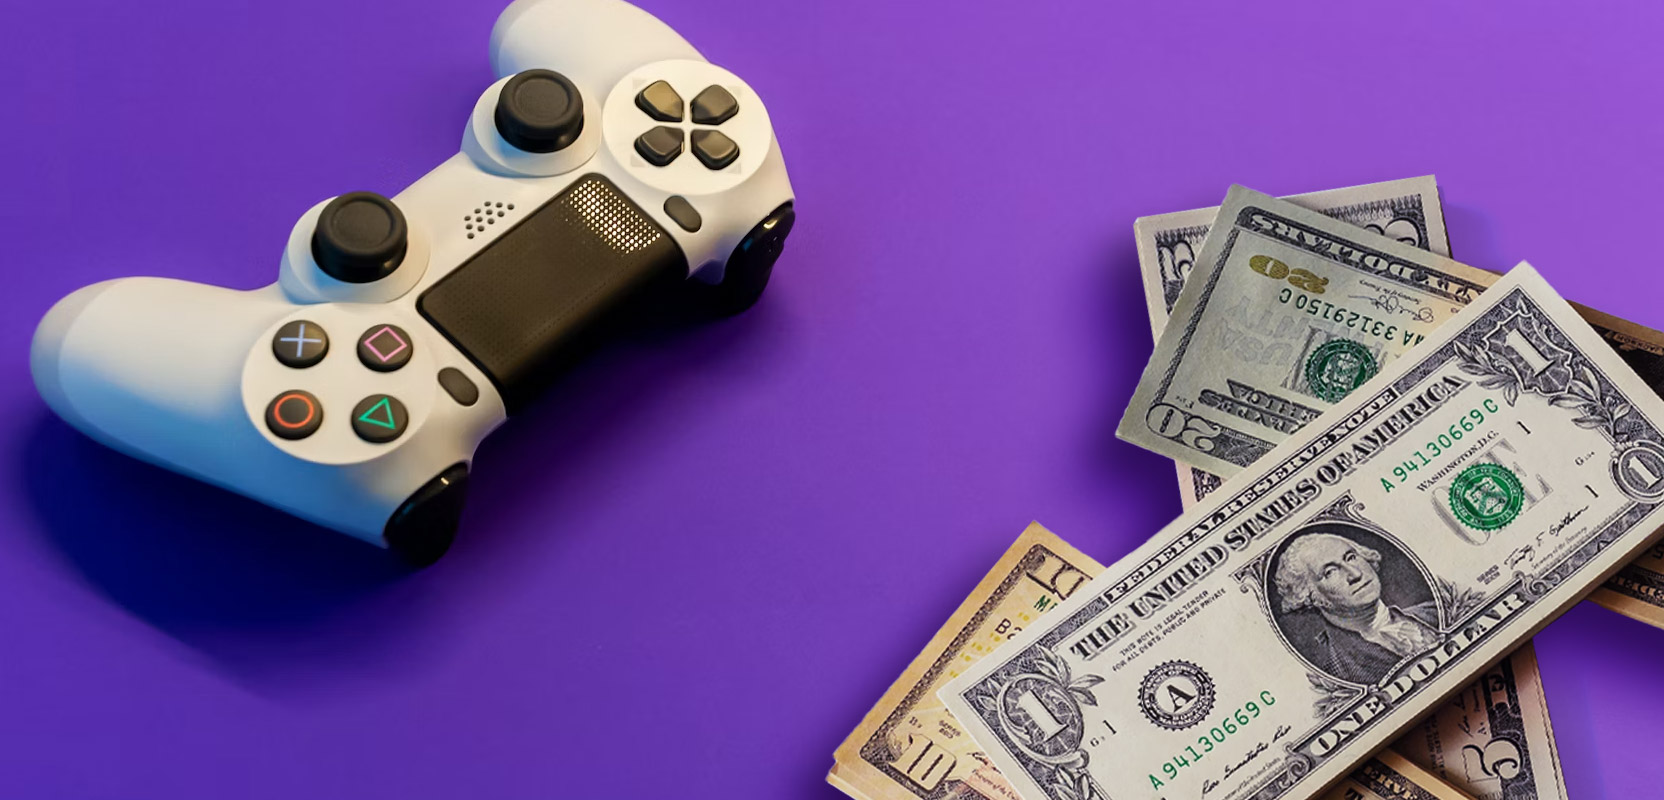 PlayStation controller sitting next to a pile of money